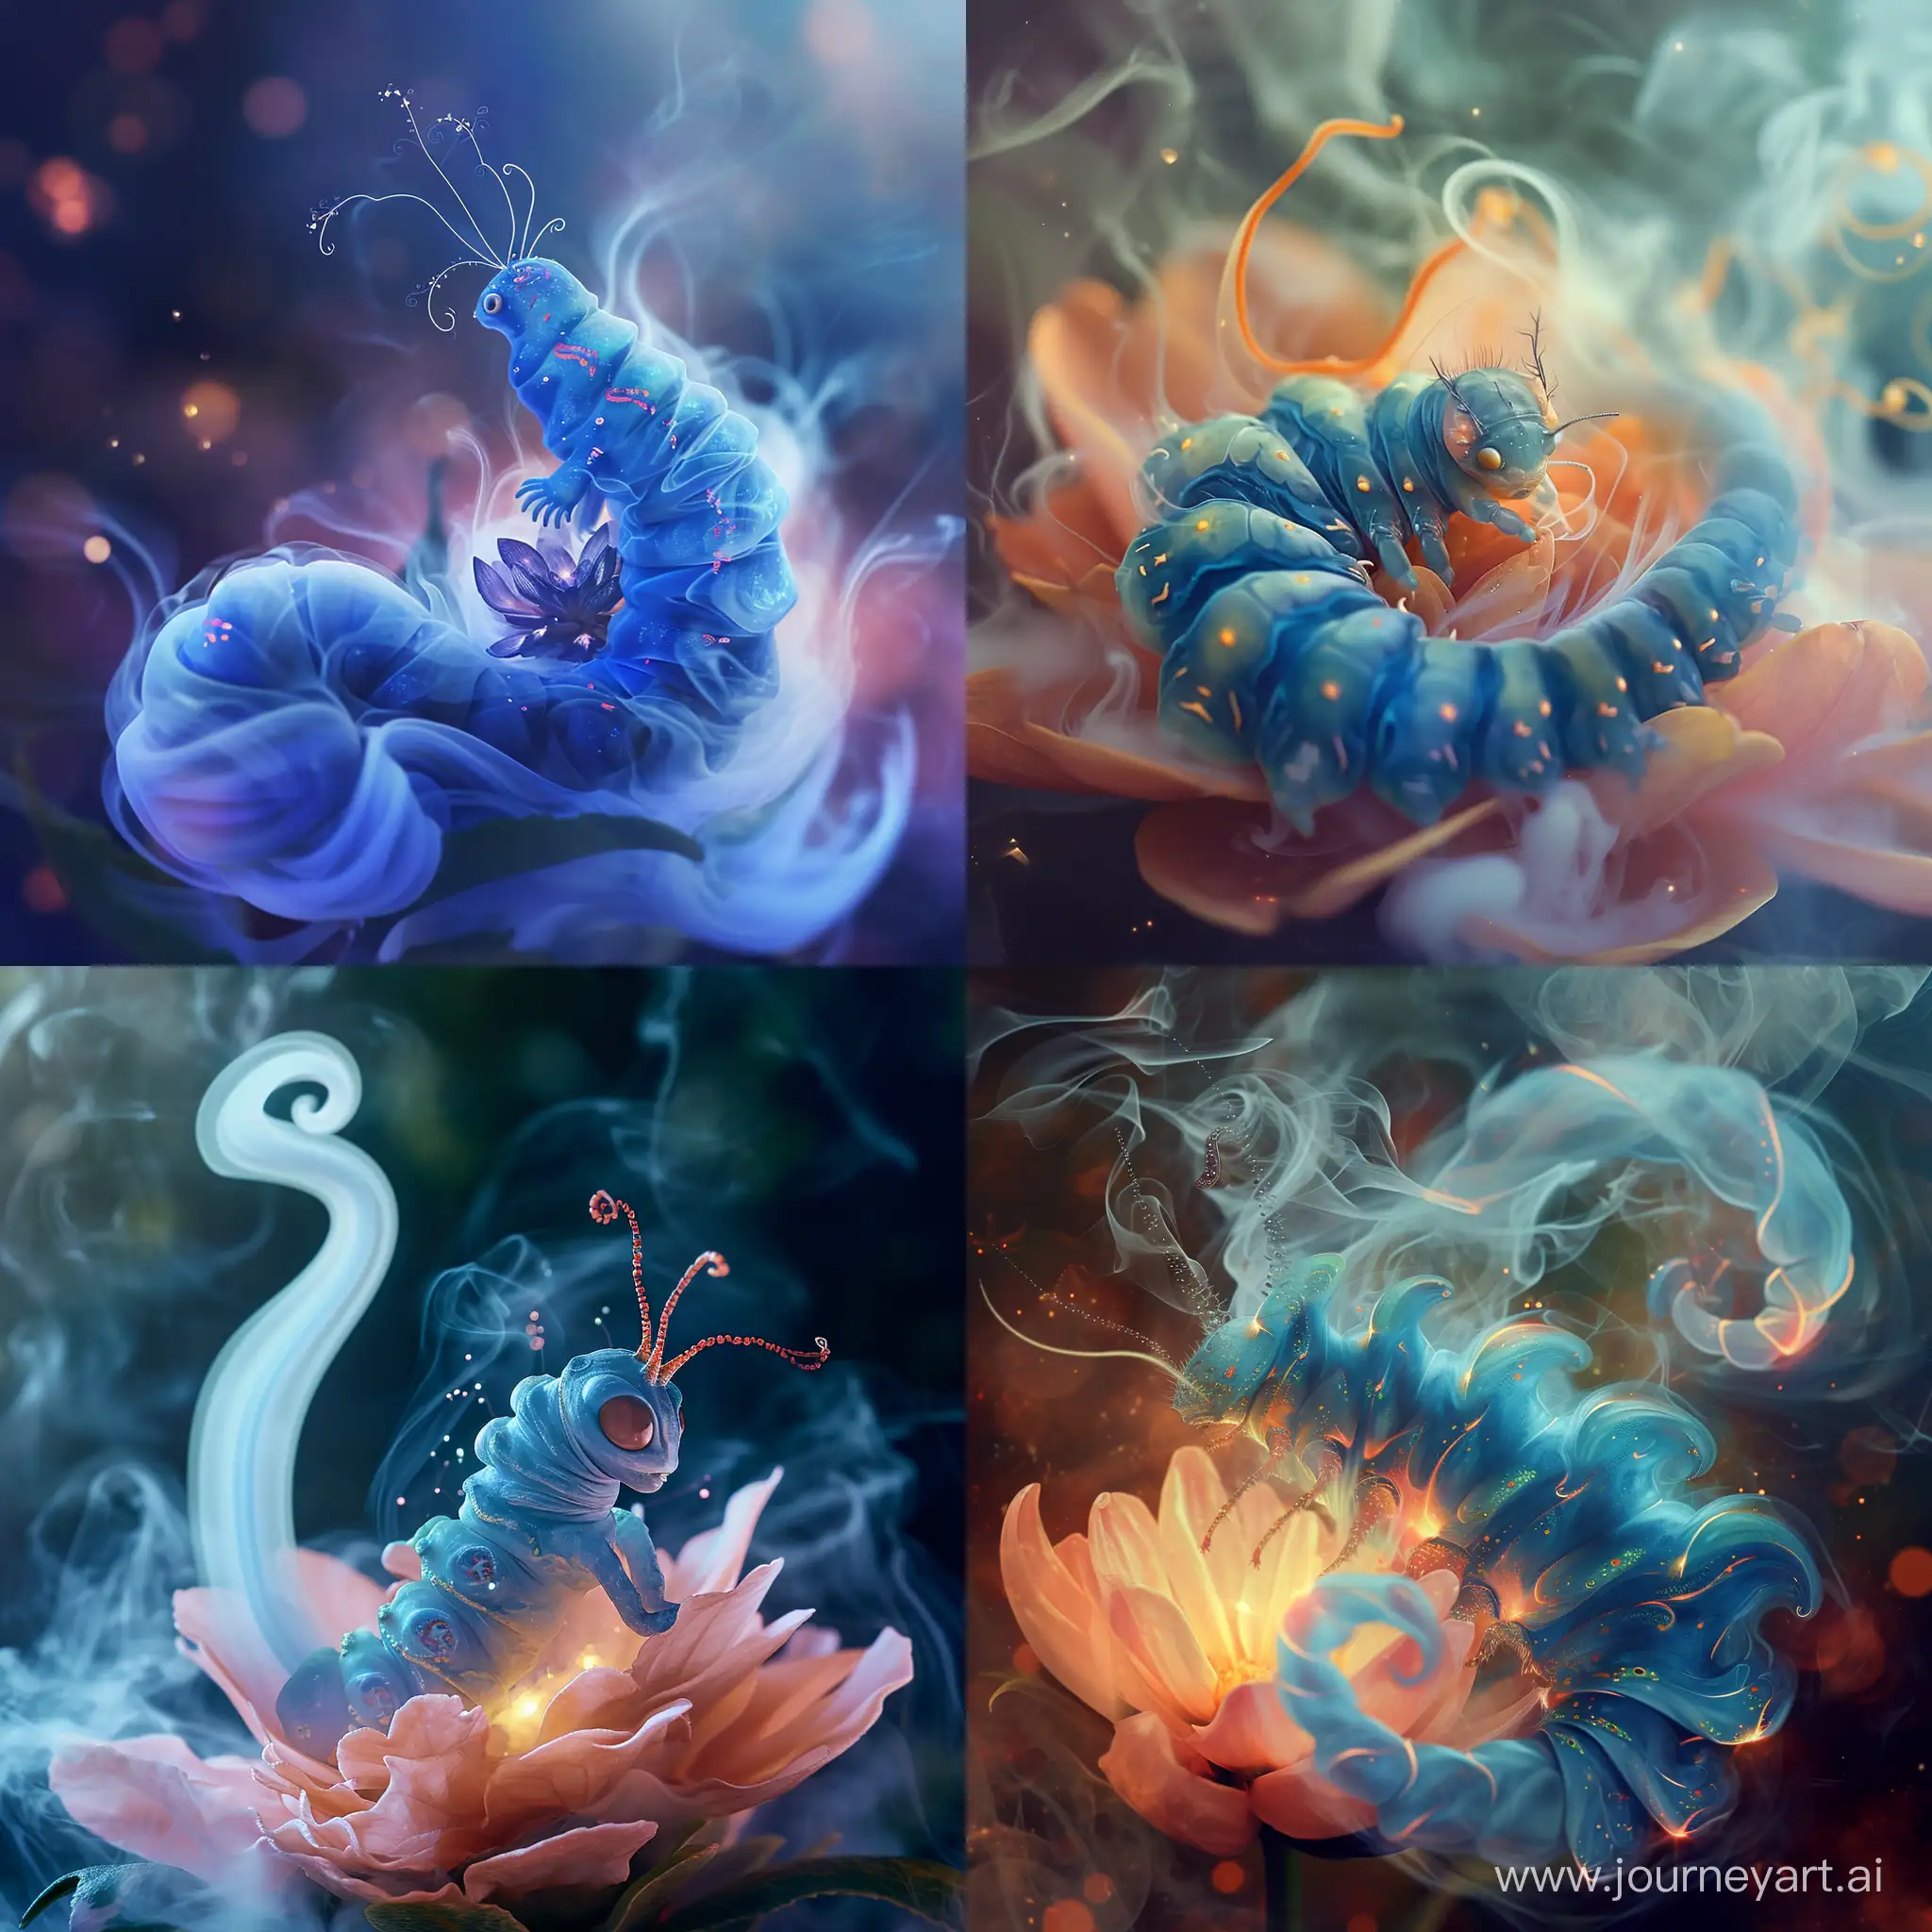 Enchanting-Blue-Caterpillar-on-Magical-Flower-Embracing-Energy-and-Wisdom